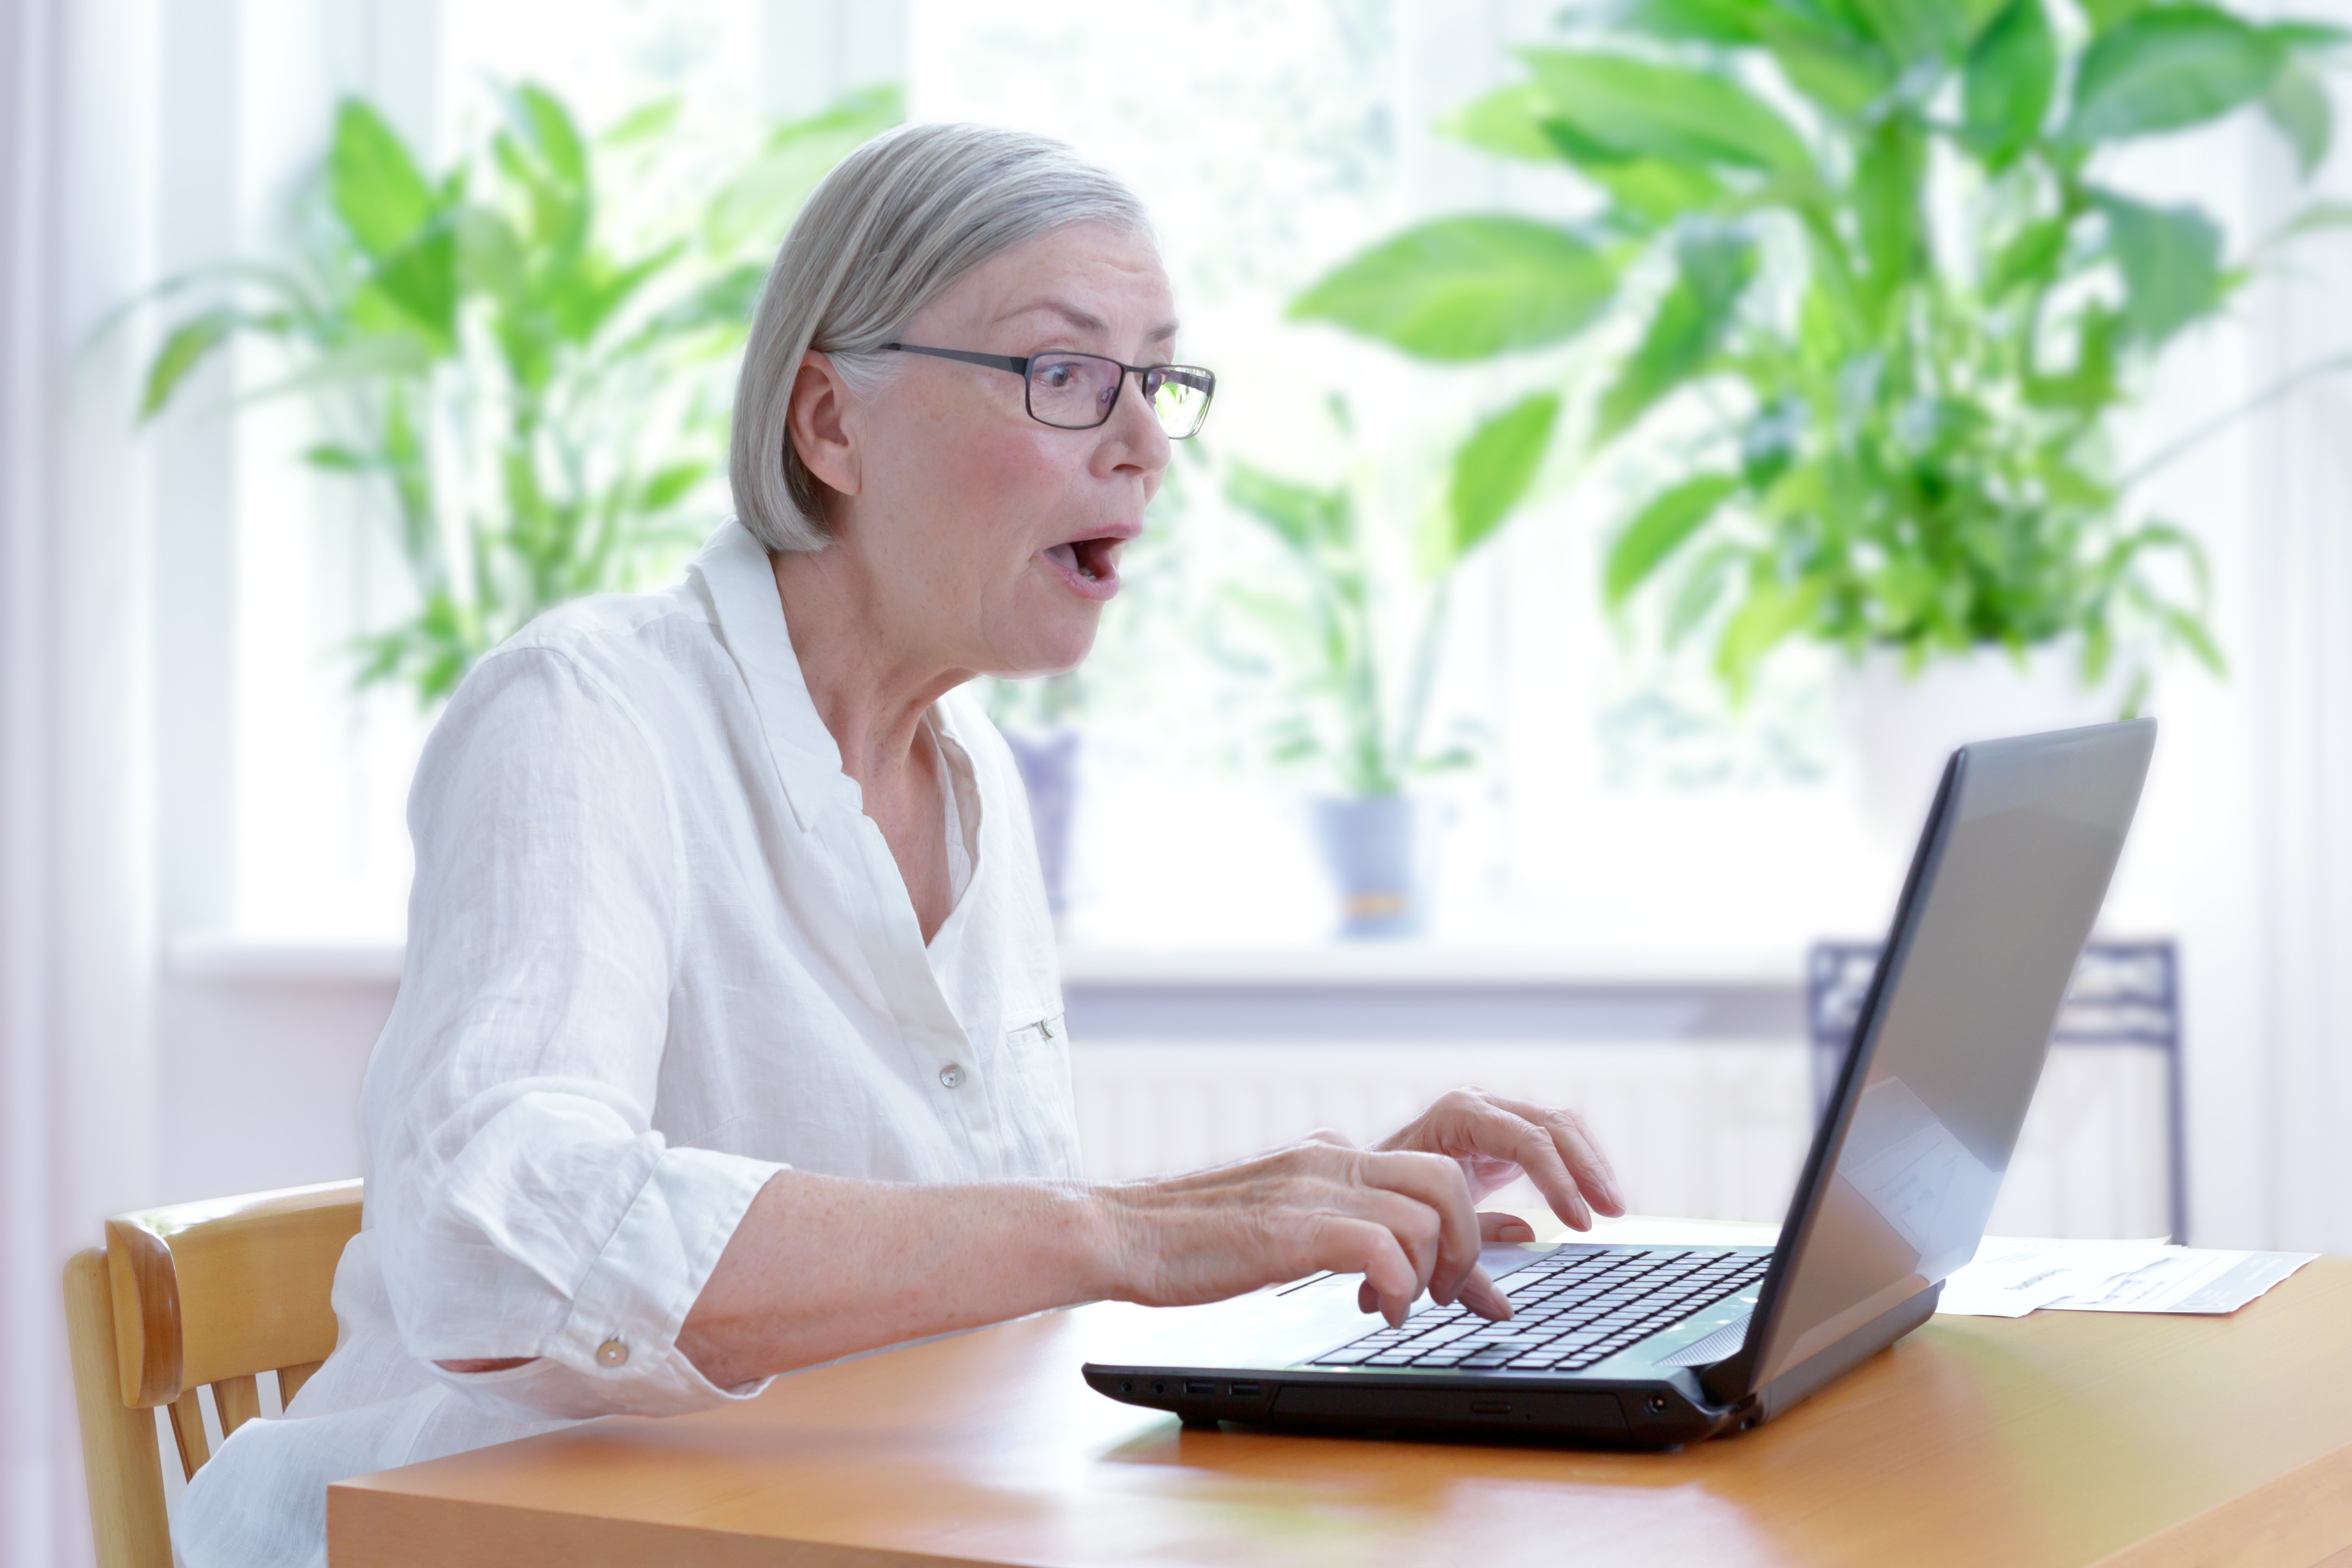 Elderly woman shocked while staring at laptop screen. | Source: Shutterstock